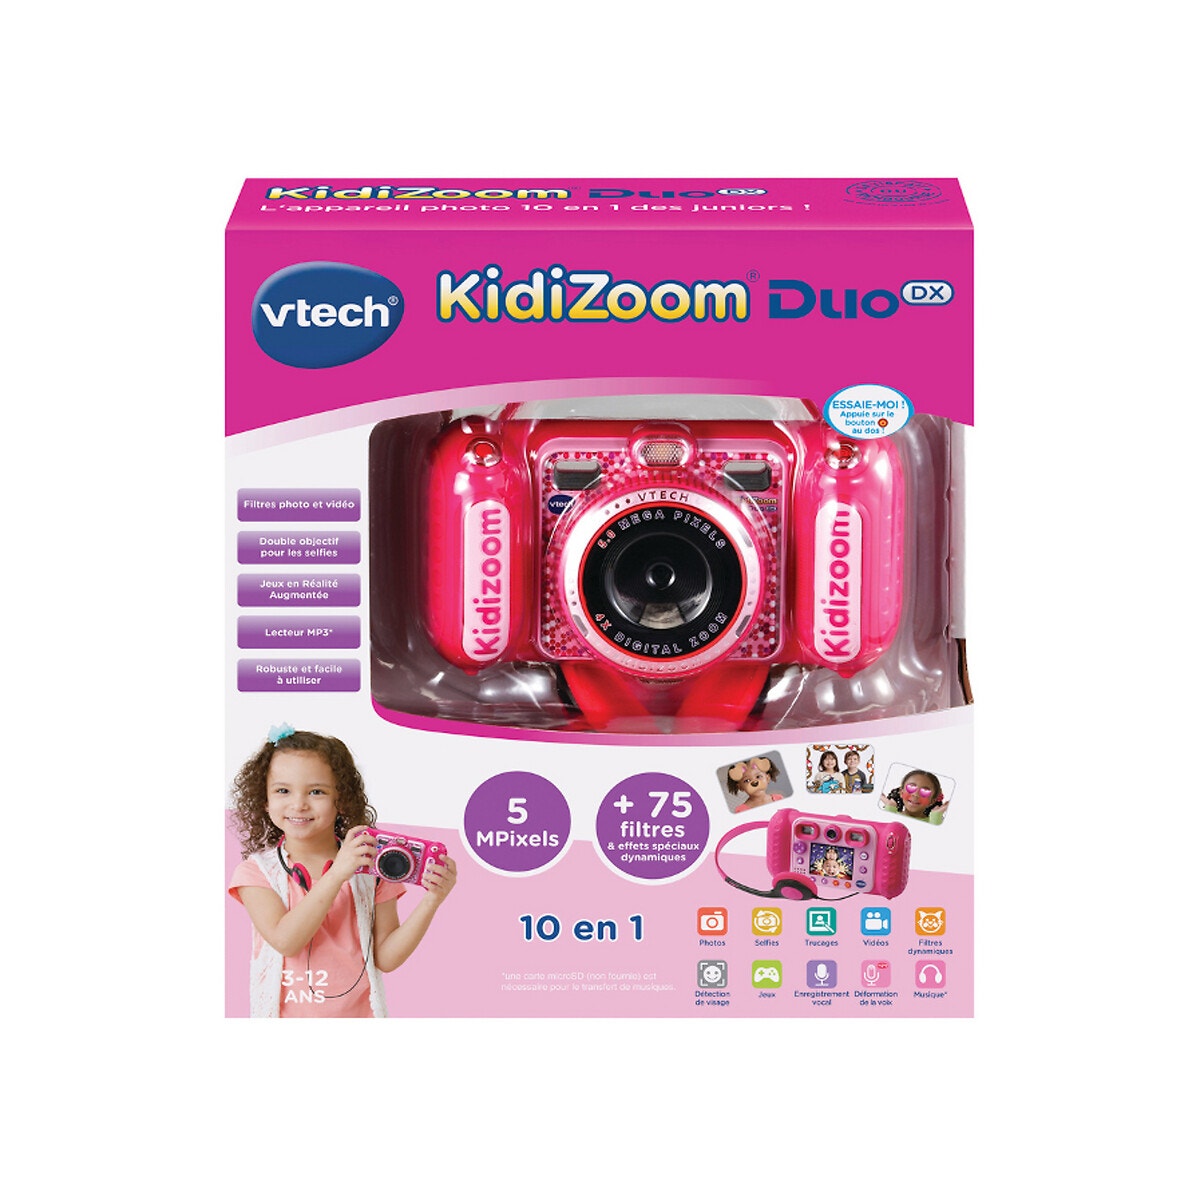 Kidizoom Duo DX (Allemand) V-Tech